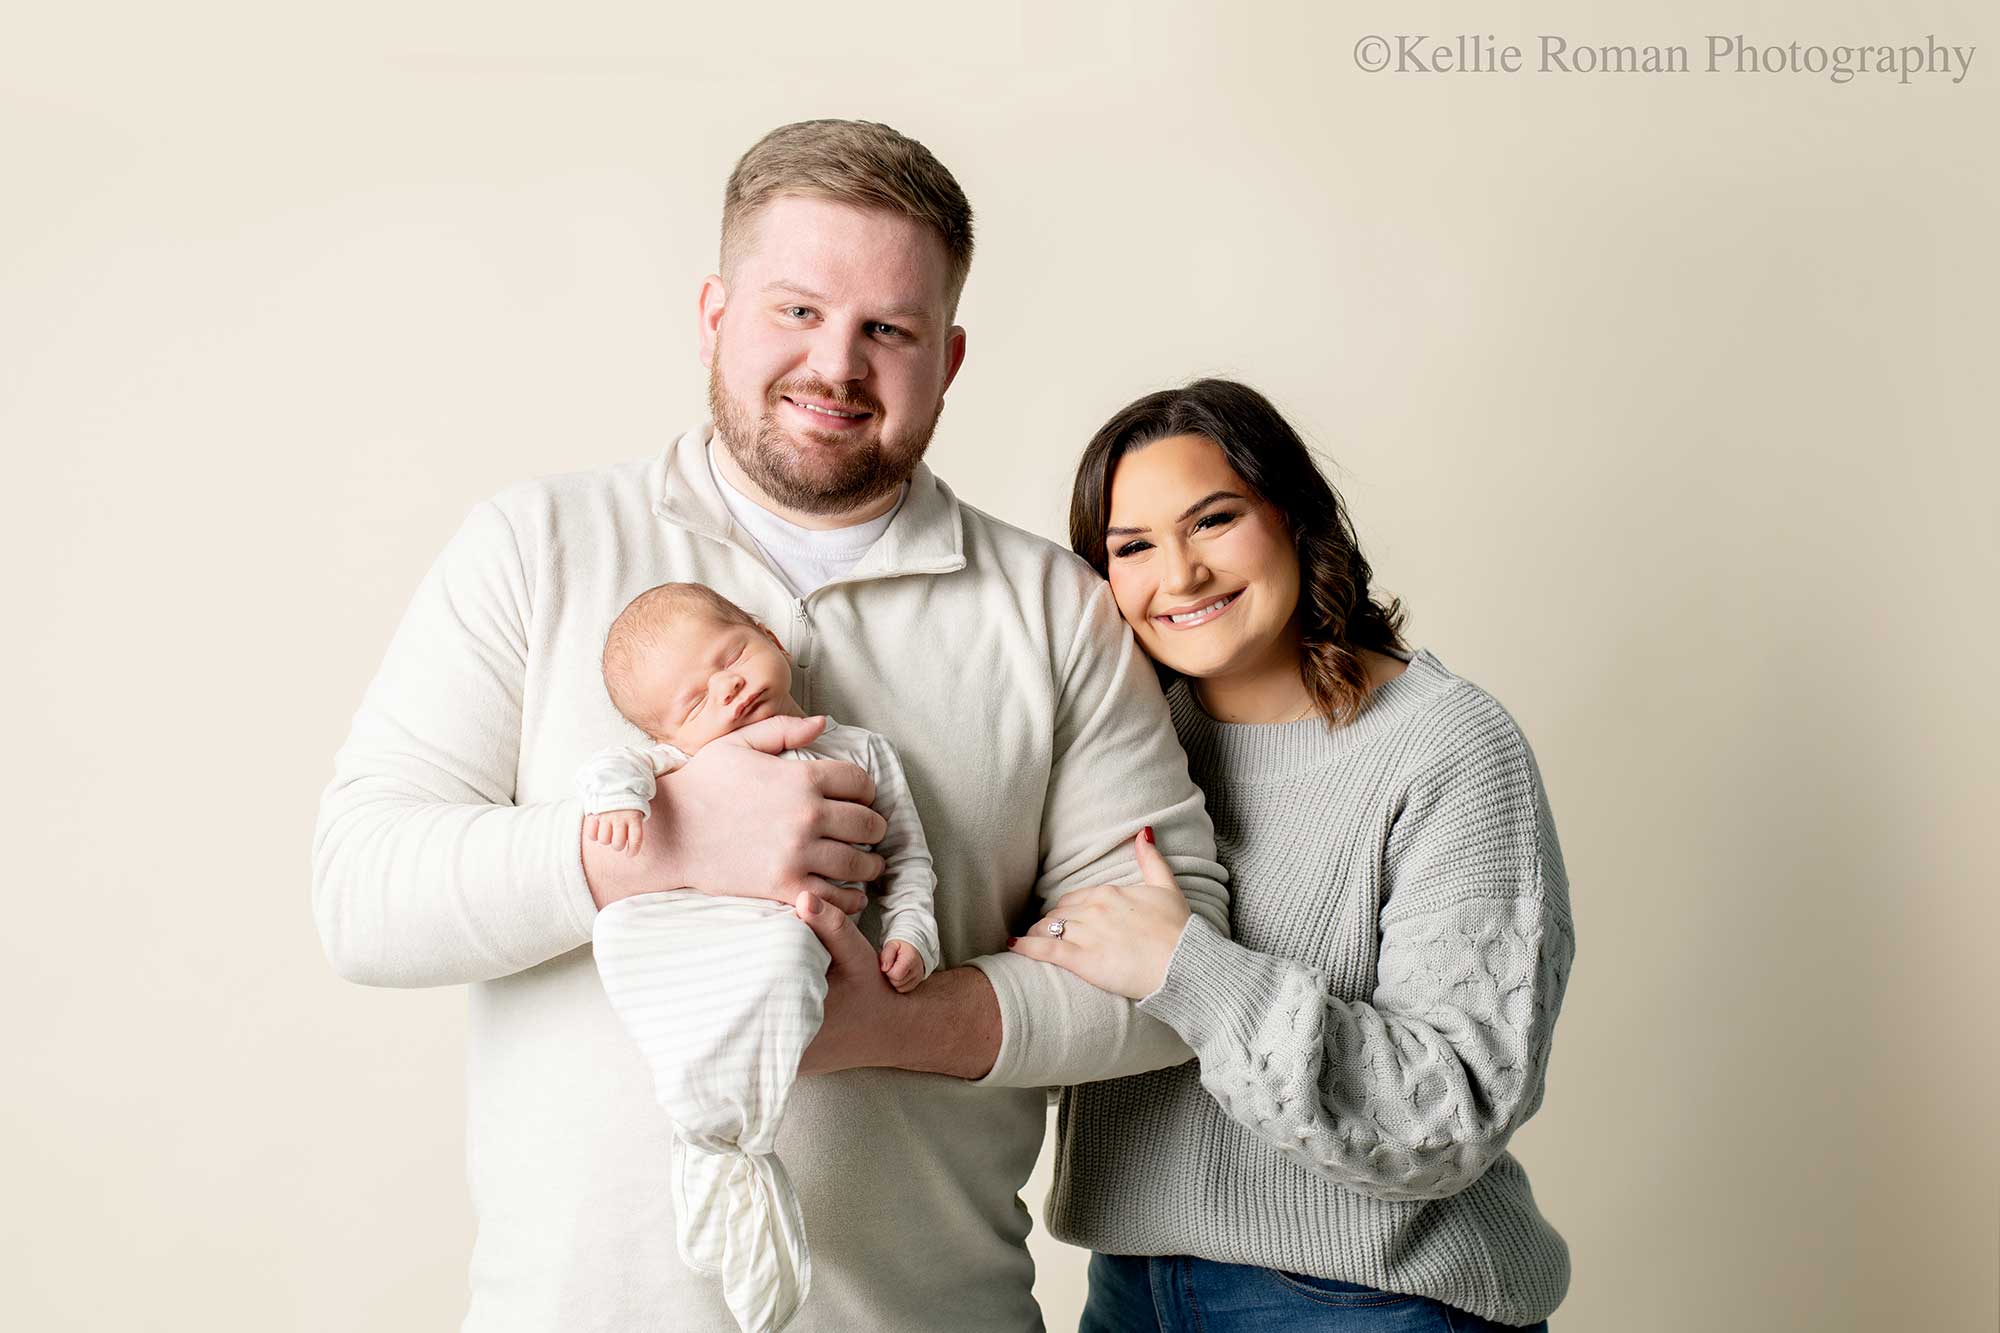 milwaukee newborn photographers. a husband and wife are standing in front of cream backdrop smiling and looking at the camera. the husband is holding their newborn baby against his chest, while he is sleeping. the mom is leaning against dads arm with her hand on his arm. the family is wearing shades of cream and light grey.